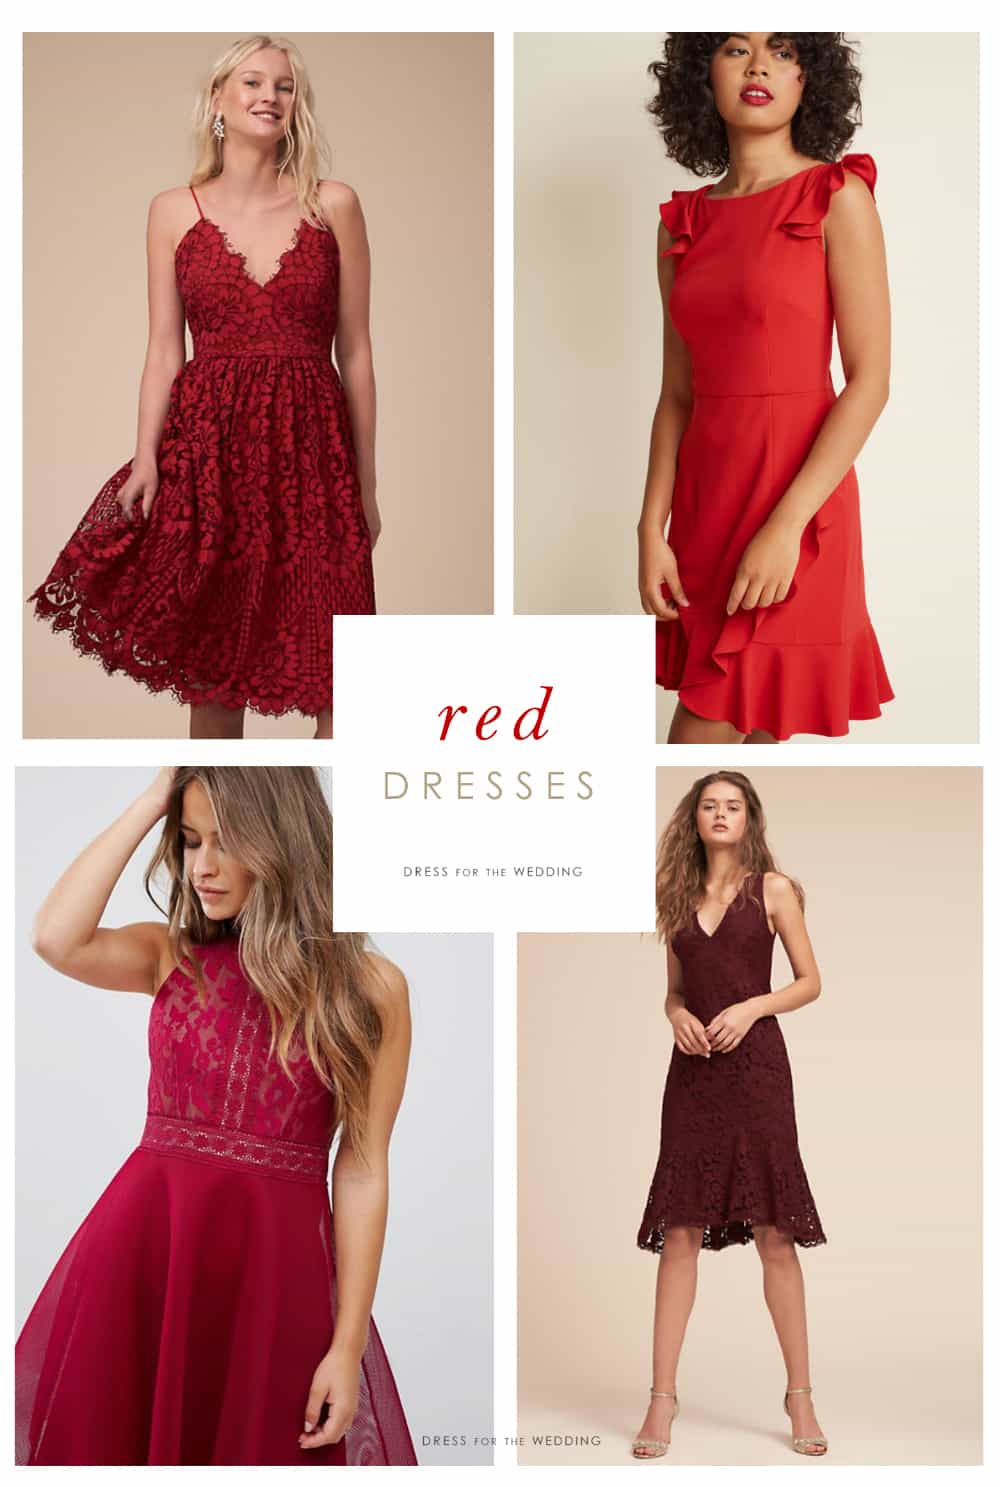 Best Red Dresses To Wear To A Wedding in the world The ultimate guide 